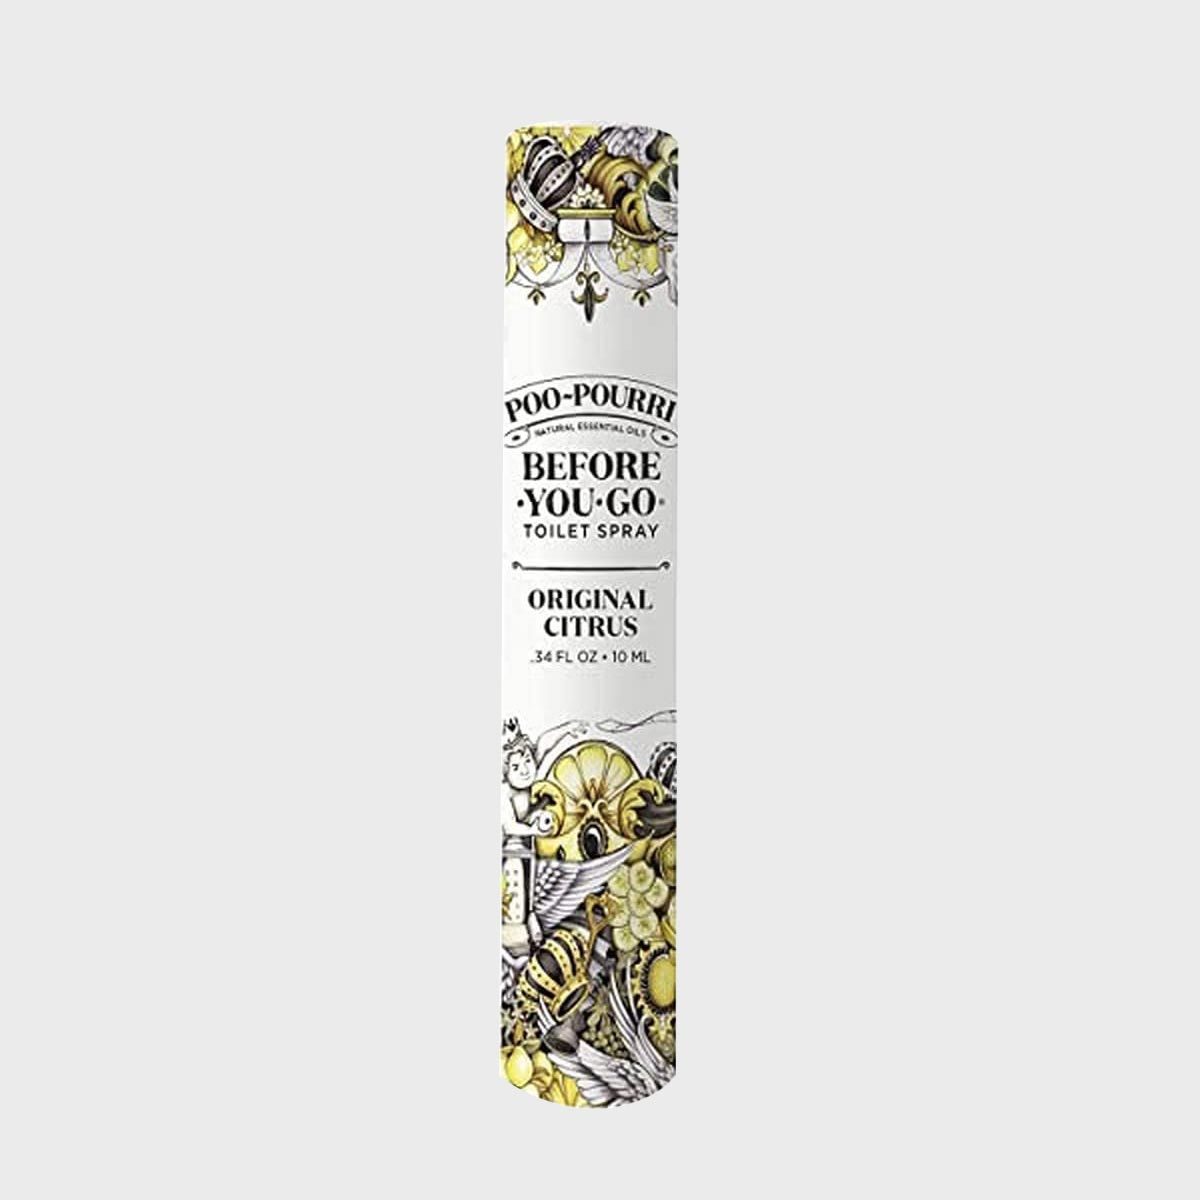 <p>This might seem like a silly purchase with a giggle-inducing name at first glance, but it's among the more considerate Amazon travel accessories if you're vacationing with others. Once you try it, you're likely to find yourself packing <a href="https://www.amazon.com/Poo-Pourri-Before-You-Go-Toilet-Travel-Original/dp/B07CN6ZDVY" rel="noopener noreferrer">Poo-Pourri</a> on each trip. If you're sharing a hotel, practice thoughtful <a href="https://www.rd.com/list/all-your-bathroom-etiquette-questions-answered/">bathroom etiquette</a> and keep things smelling nice and fresh with this scented spray that's specifically designed for the latrine.</p> <p class="listicle-page__cta-button-shop"><a class="shop-btn" href="https://www.amazon.com/Poo-Pourri-Before-You-Go-Toilet-Travel-Original/dp/B07CN6ZDVY">Shop Now</a></p>